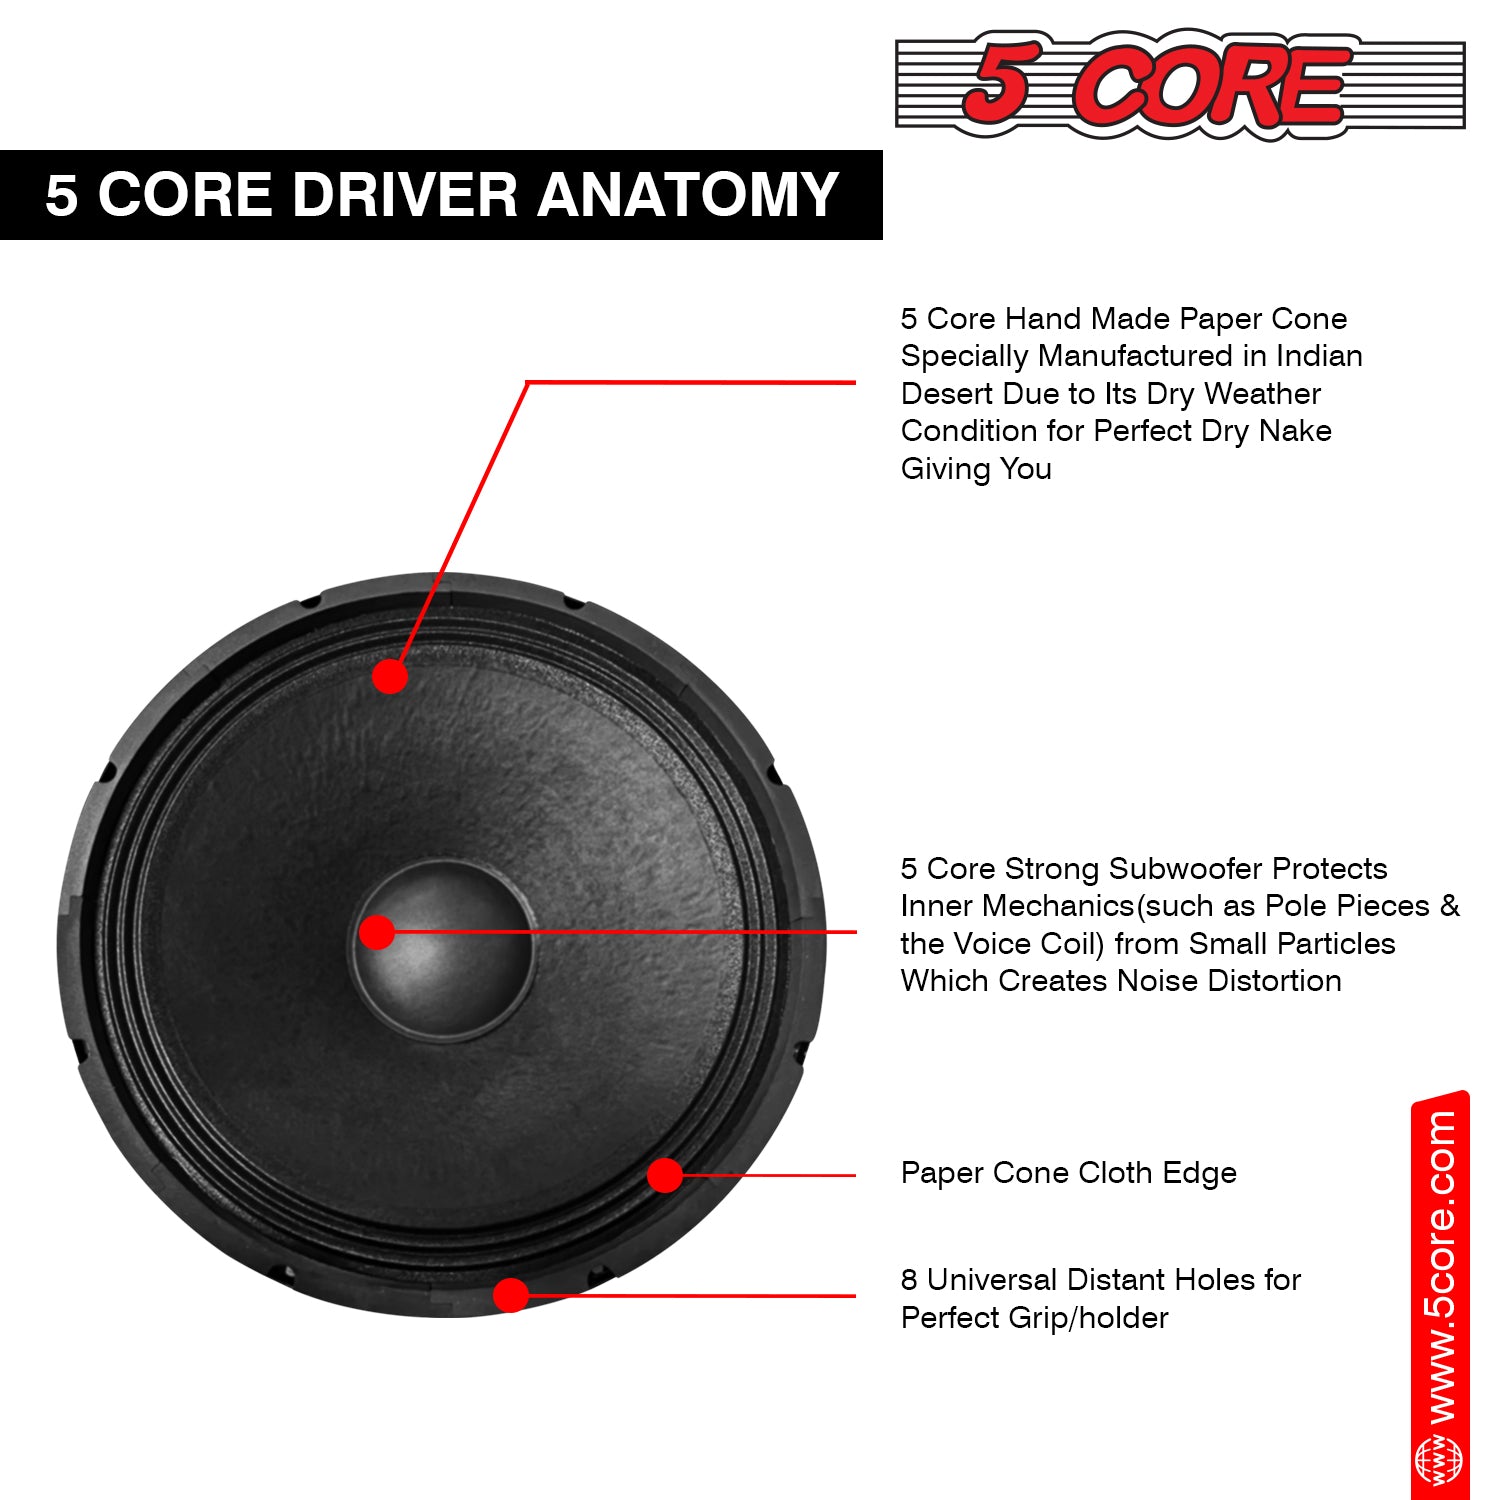 18 Inch Subwoofer, featuring a rigid paper cone and cloth edge for precise, distortion-free audio reproduction.